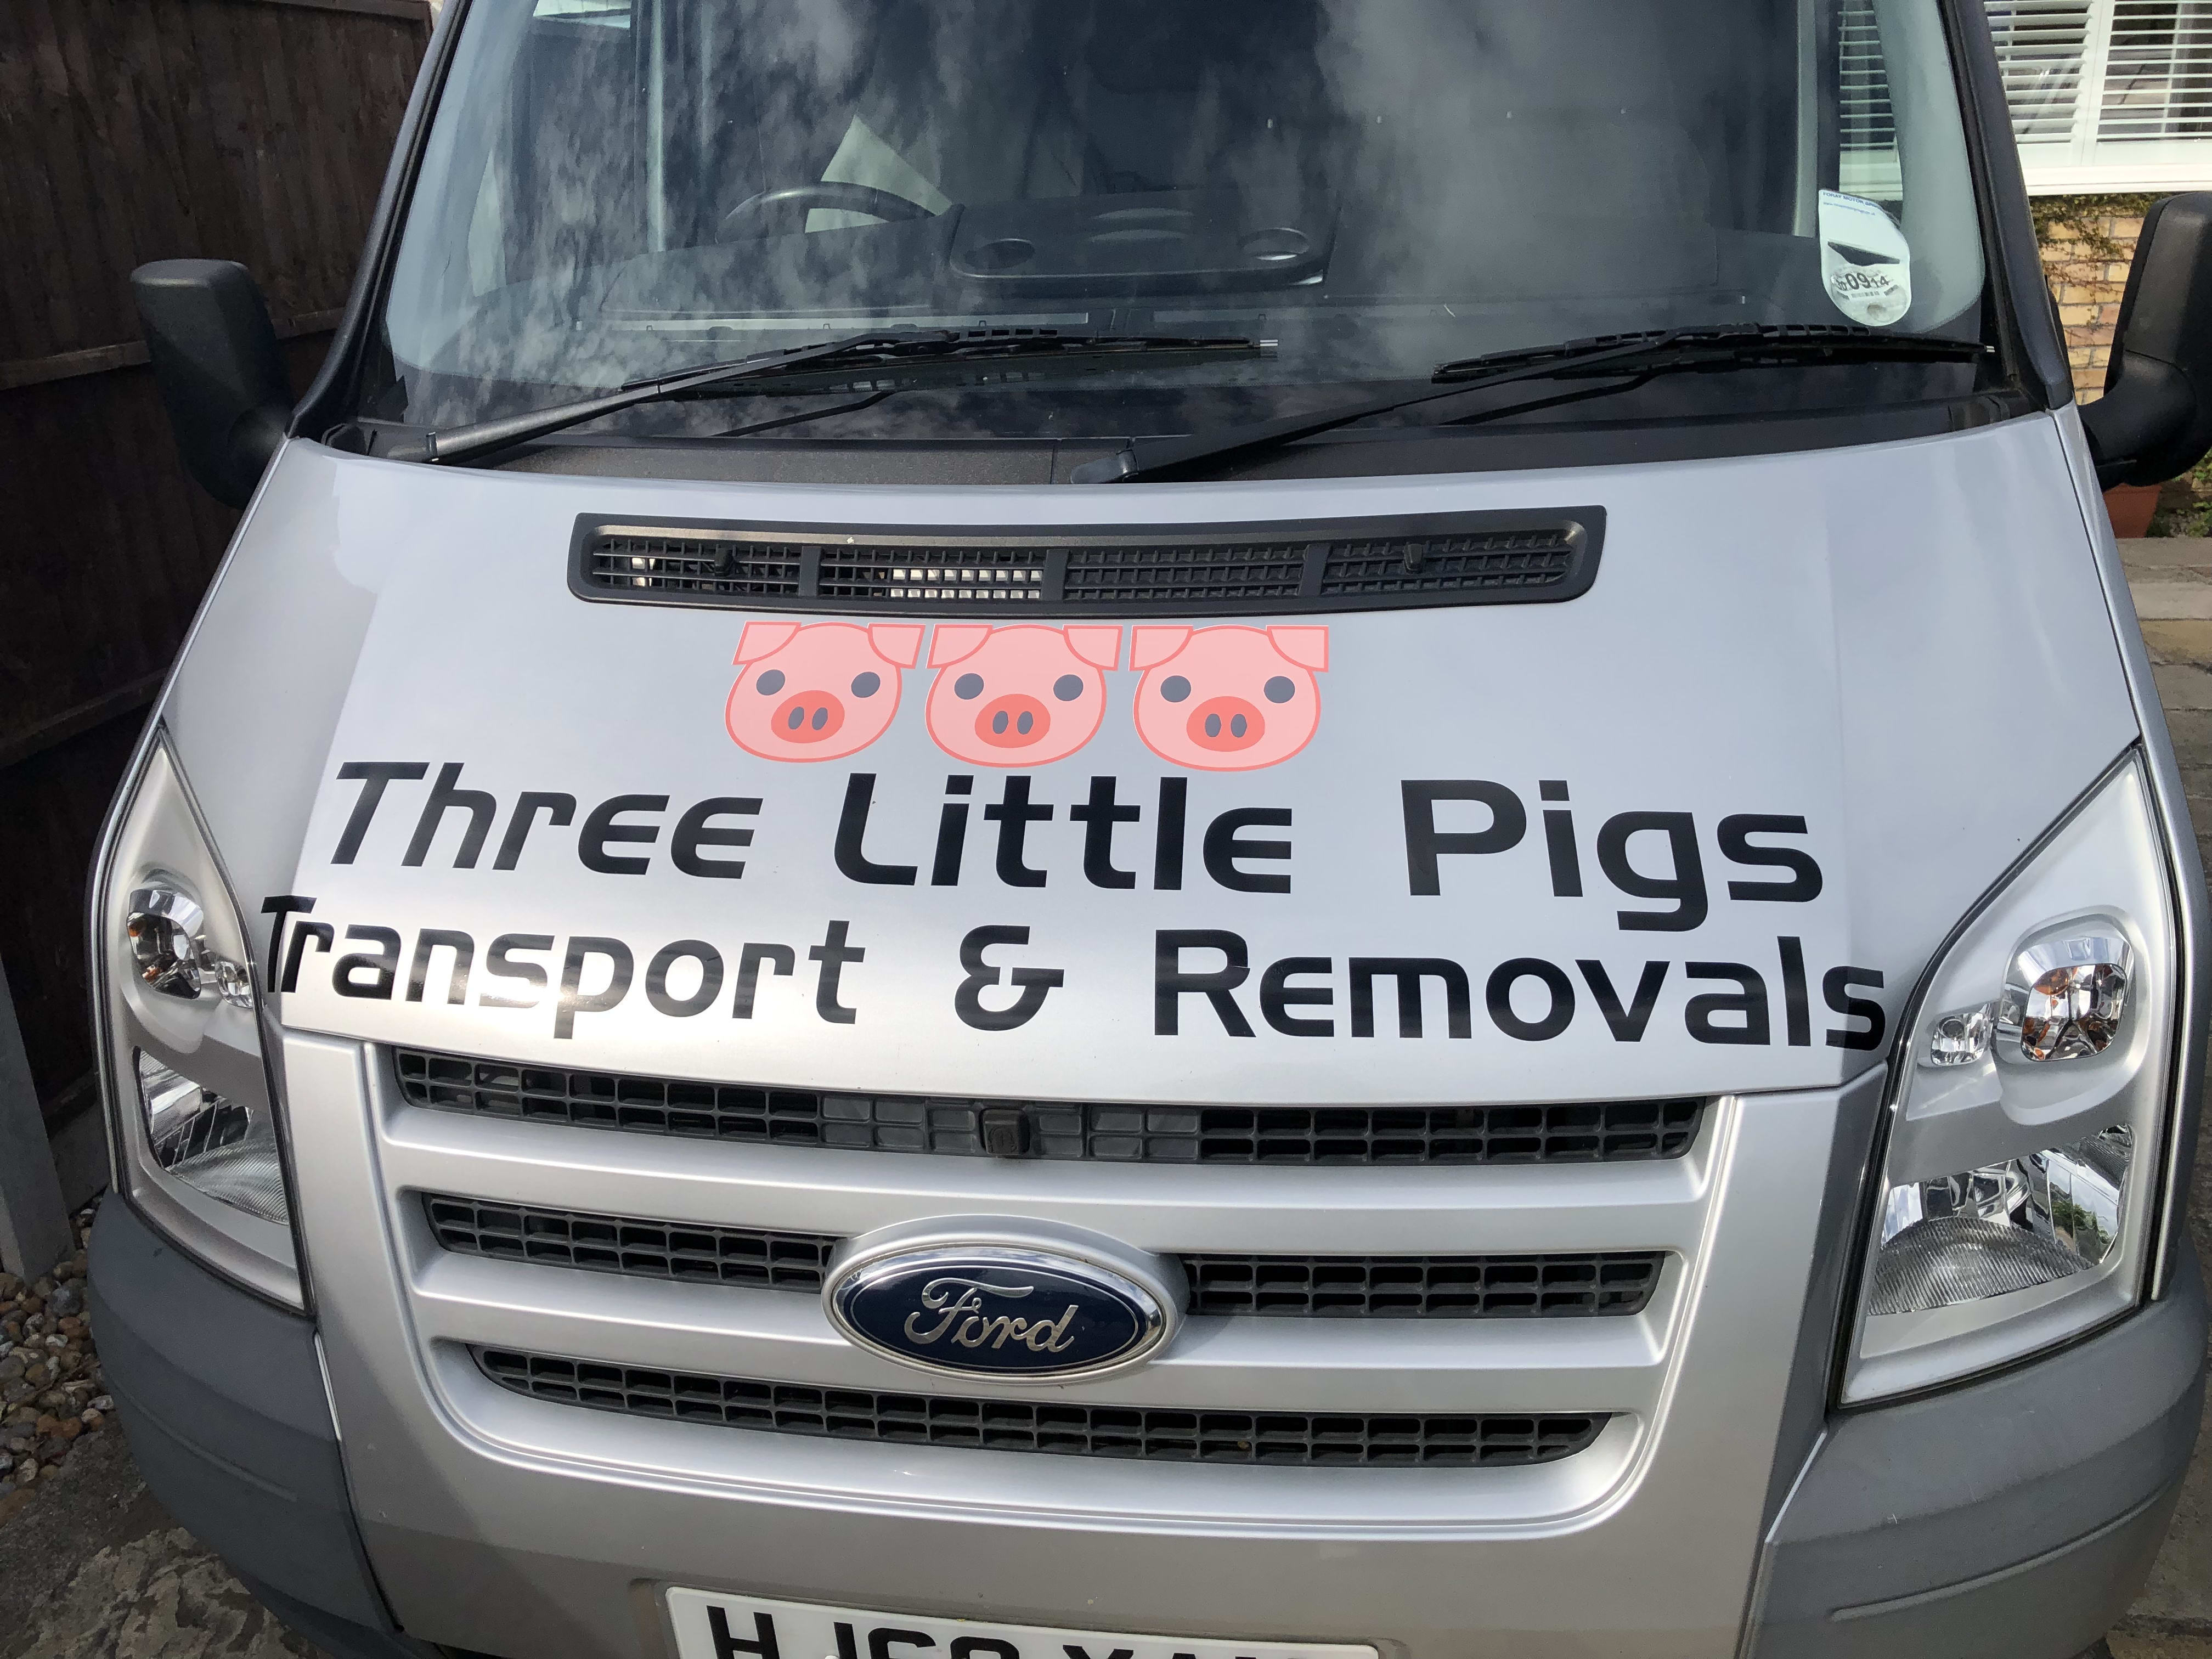 Three Little Pigs Transport and Removals